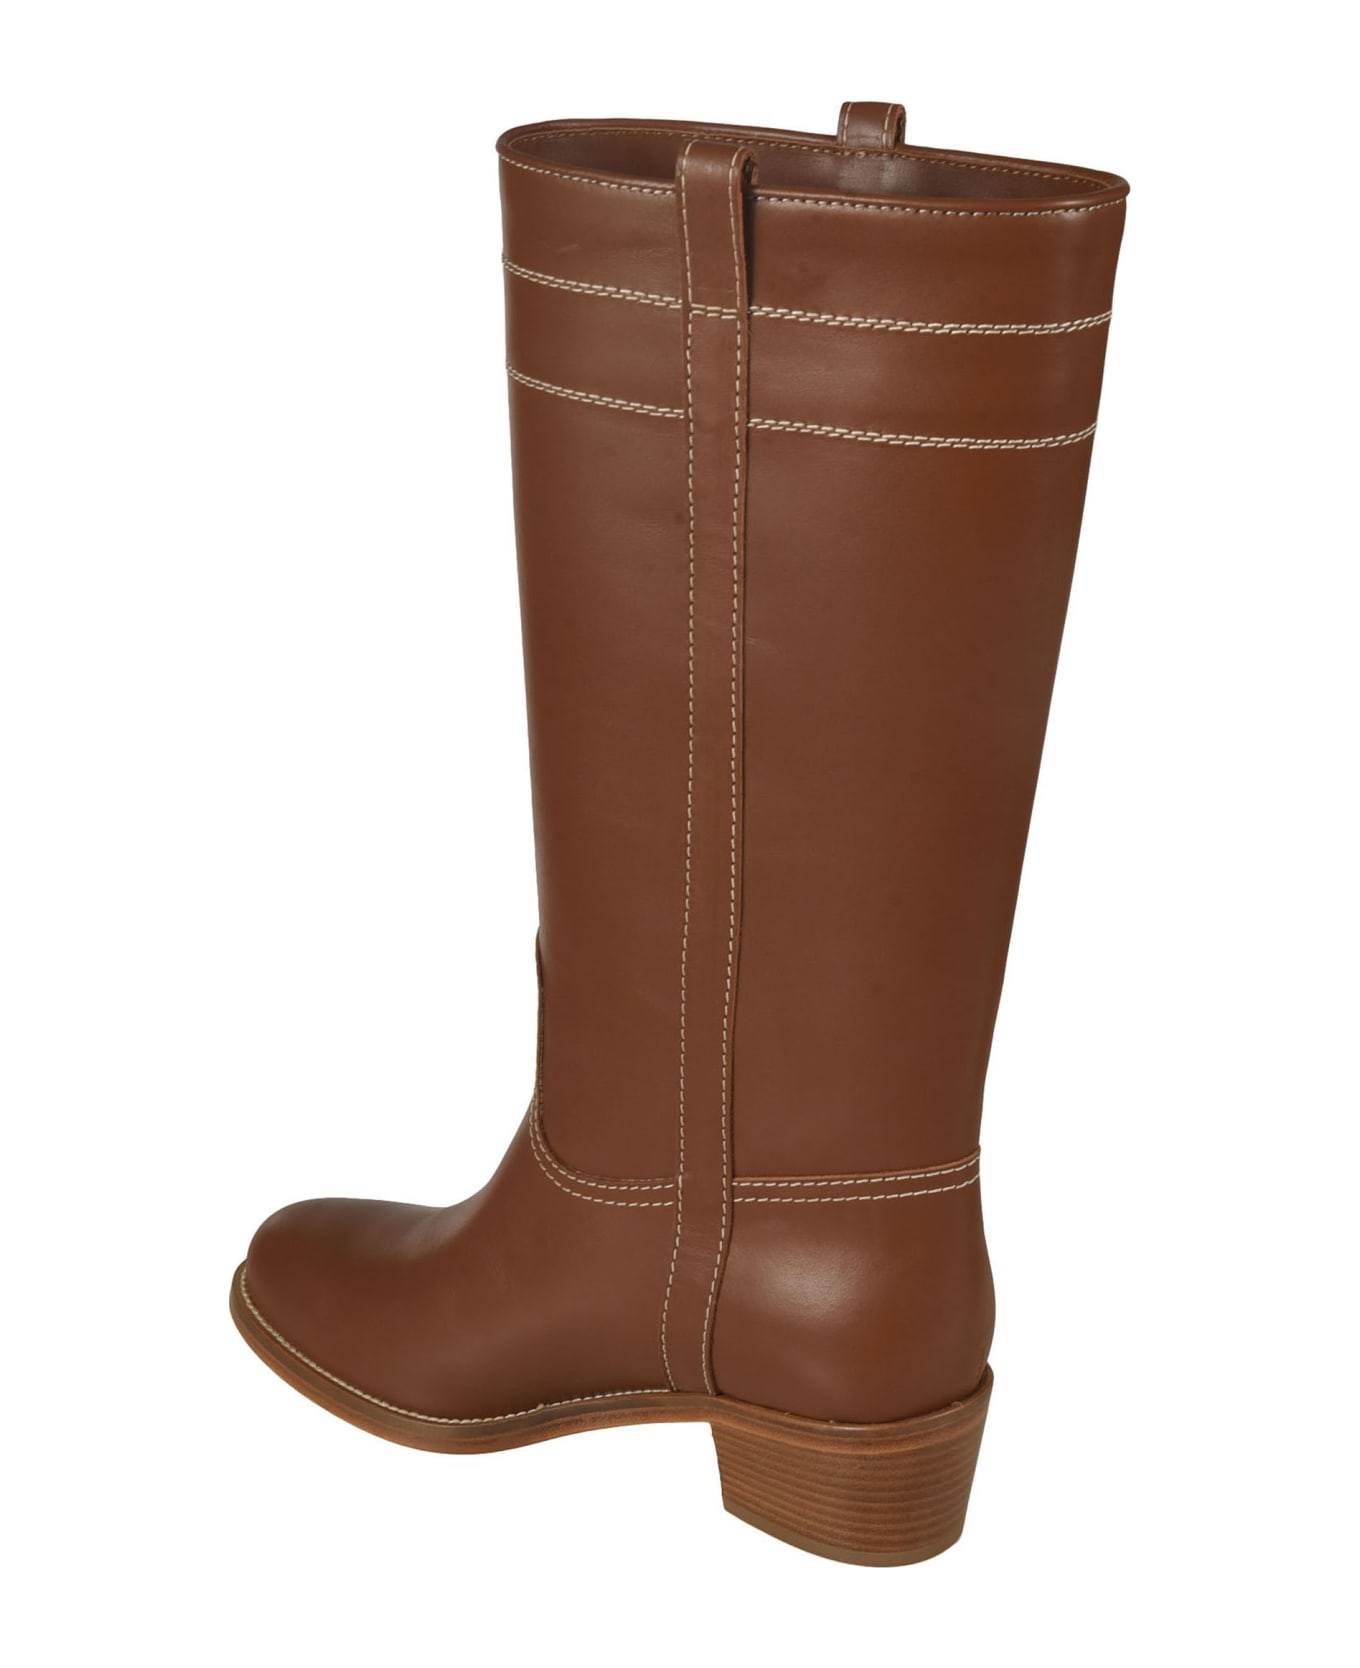 Fay Stitched Fitted Boots - BROWN